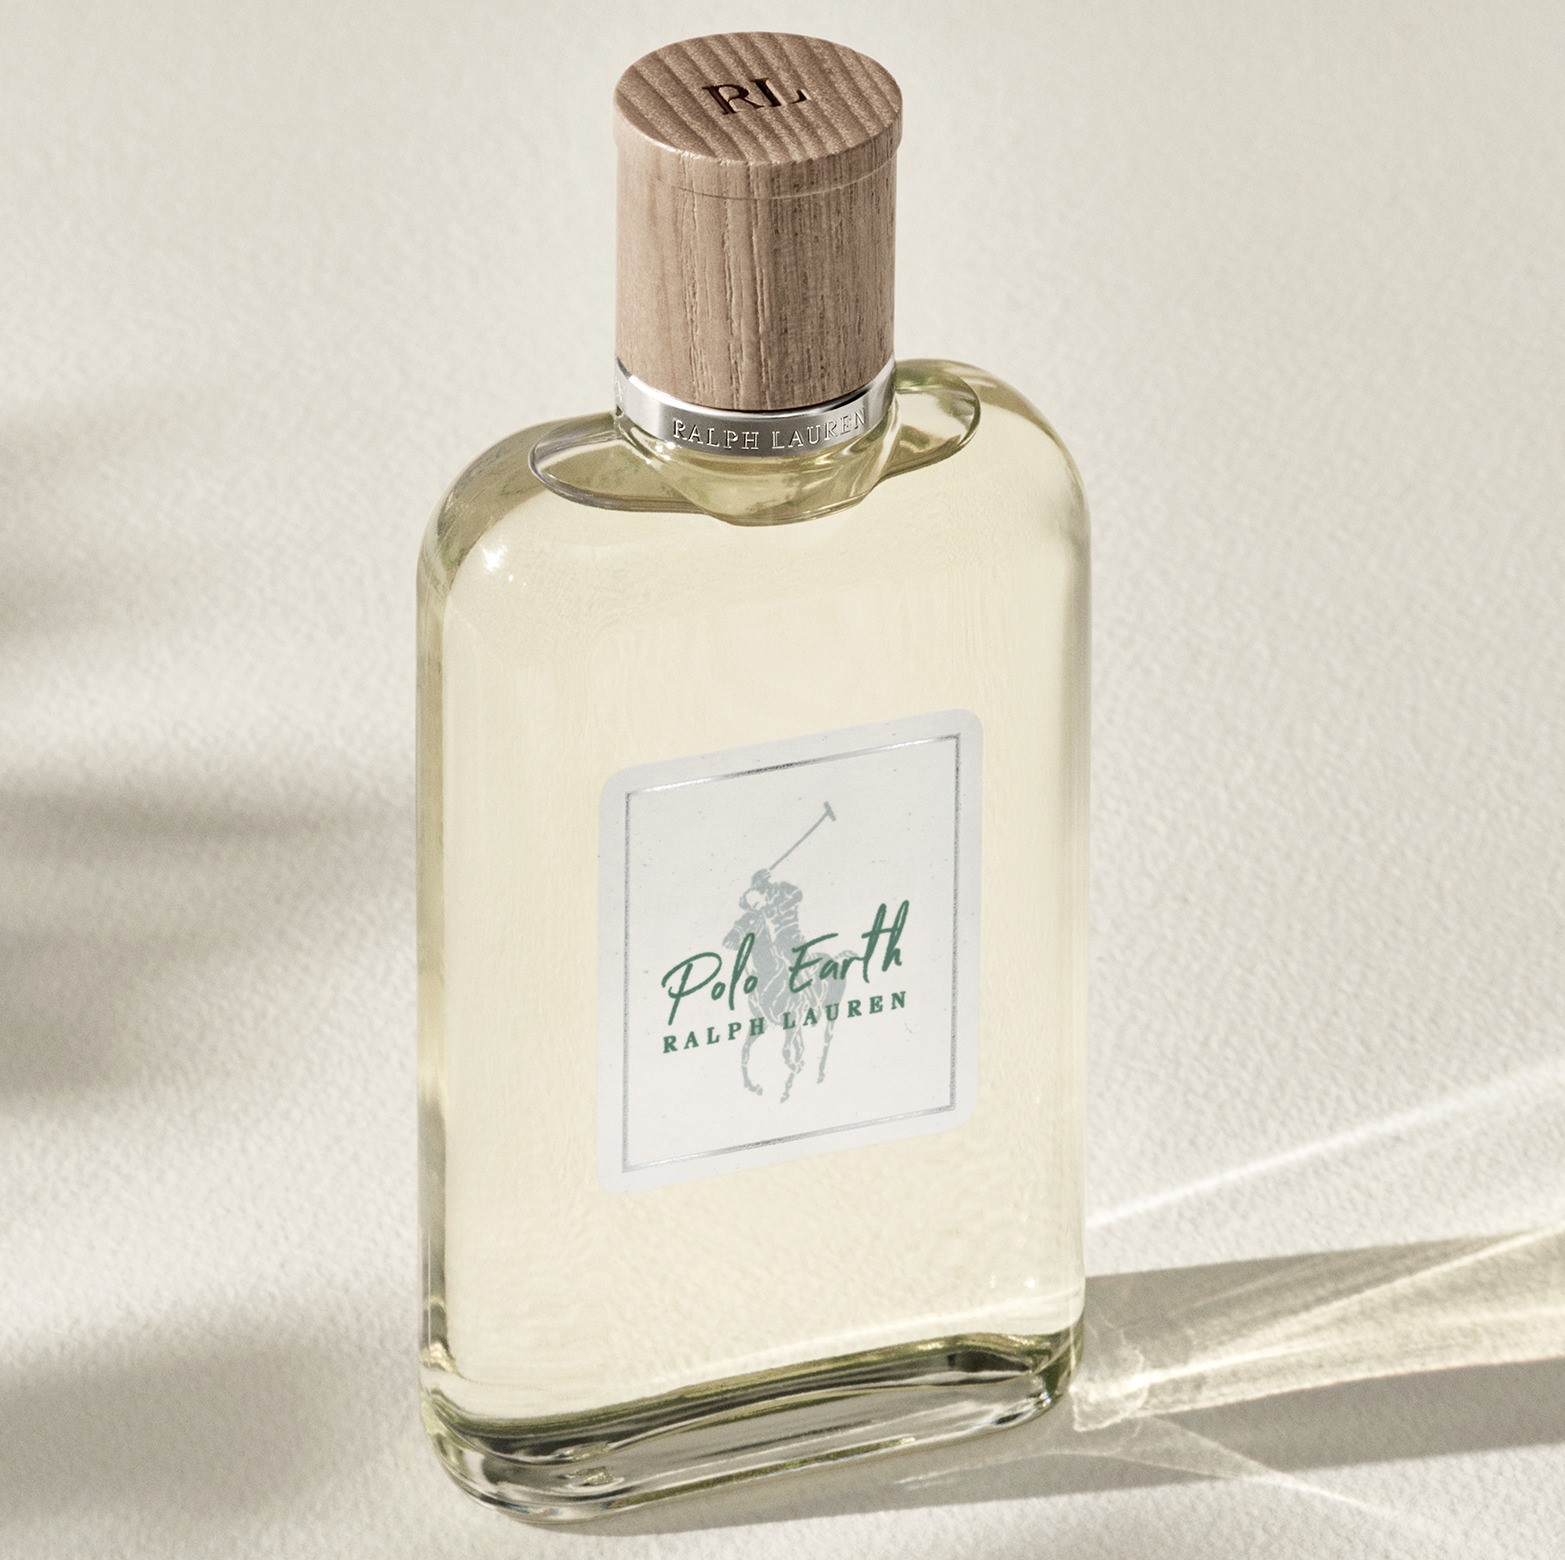 Ralph Lauren Celebrates Earth Day with Launch of Polo Earth Fragrance